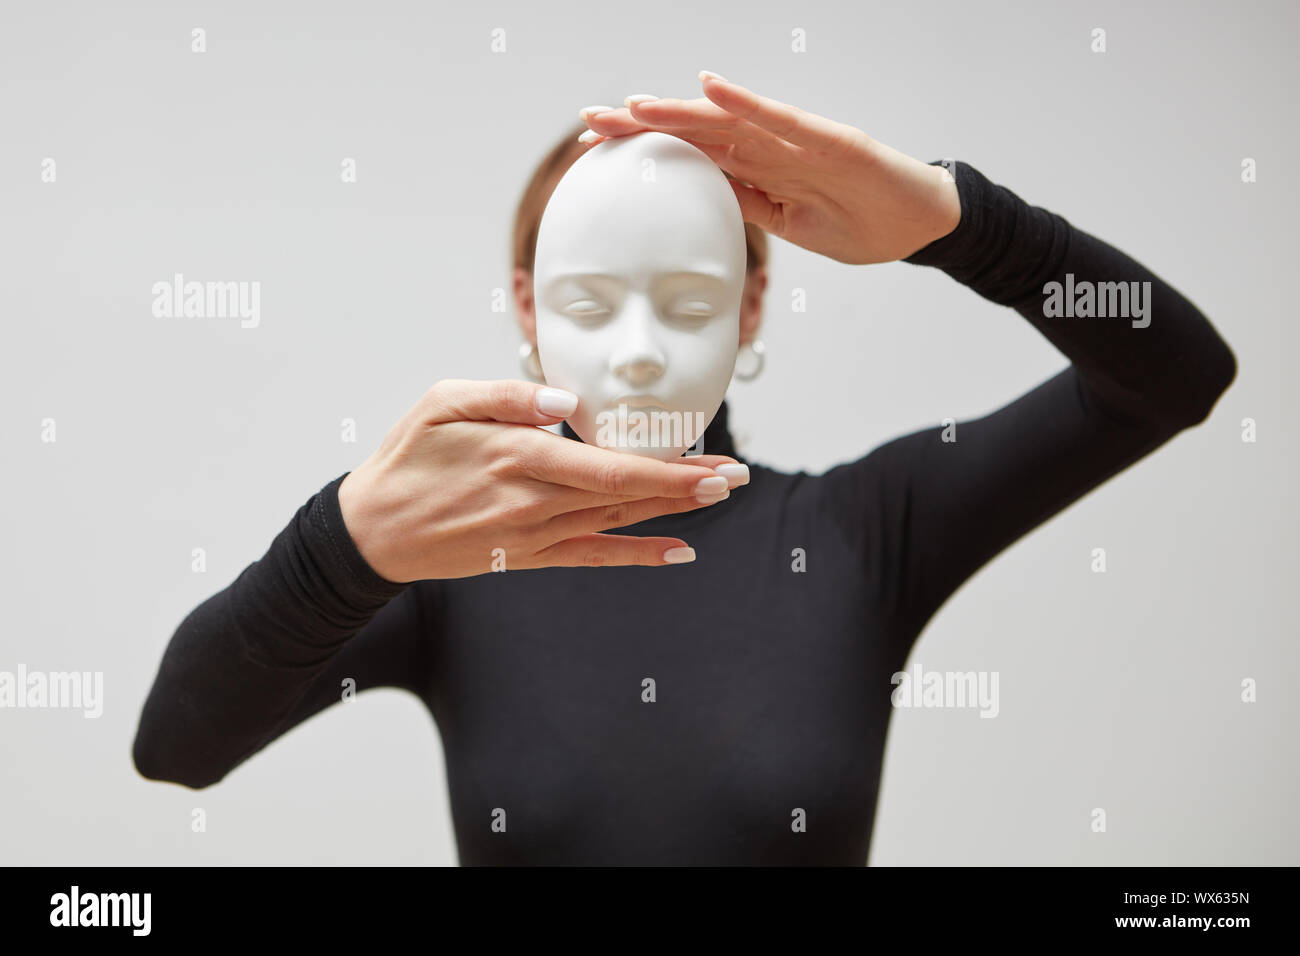 Masked man, double exposure with mask in hand and facial features partly  appearing through mask on face Stock Photo - Alamy